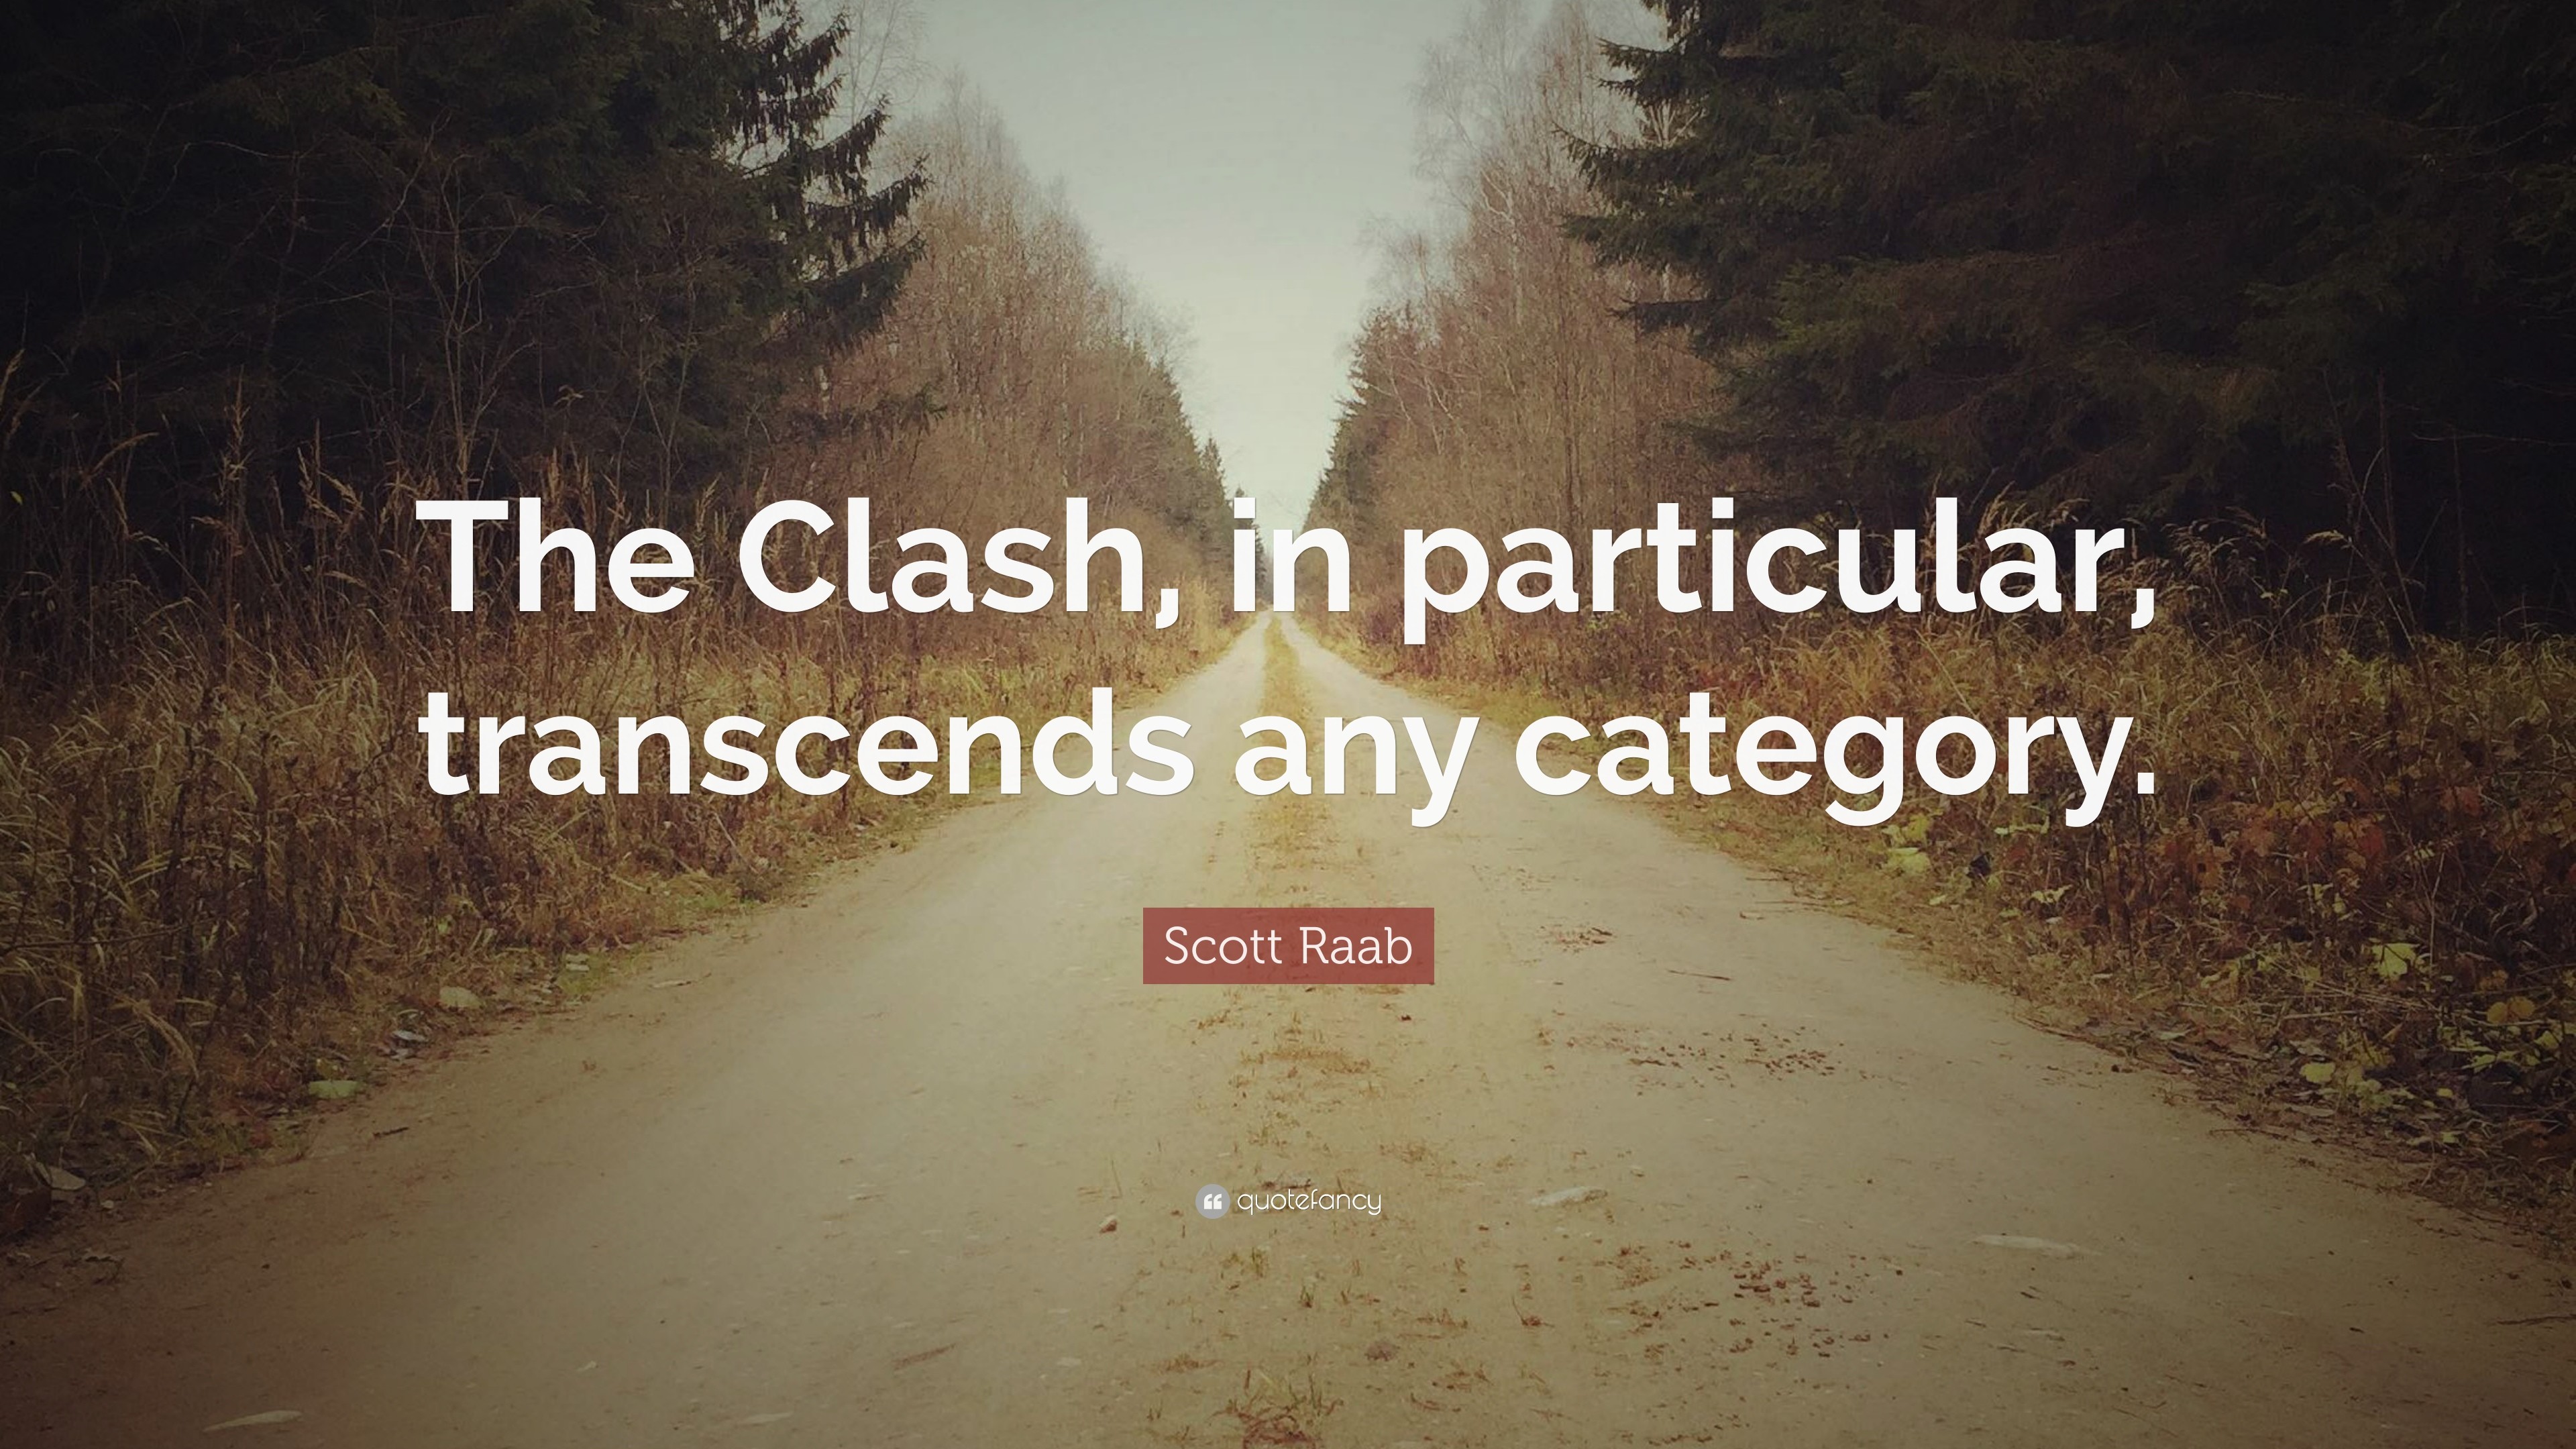 3840x2160 Scott Raab Quote: “The Clash, in particular, transcends any category.”